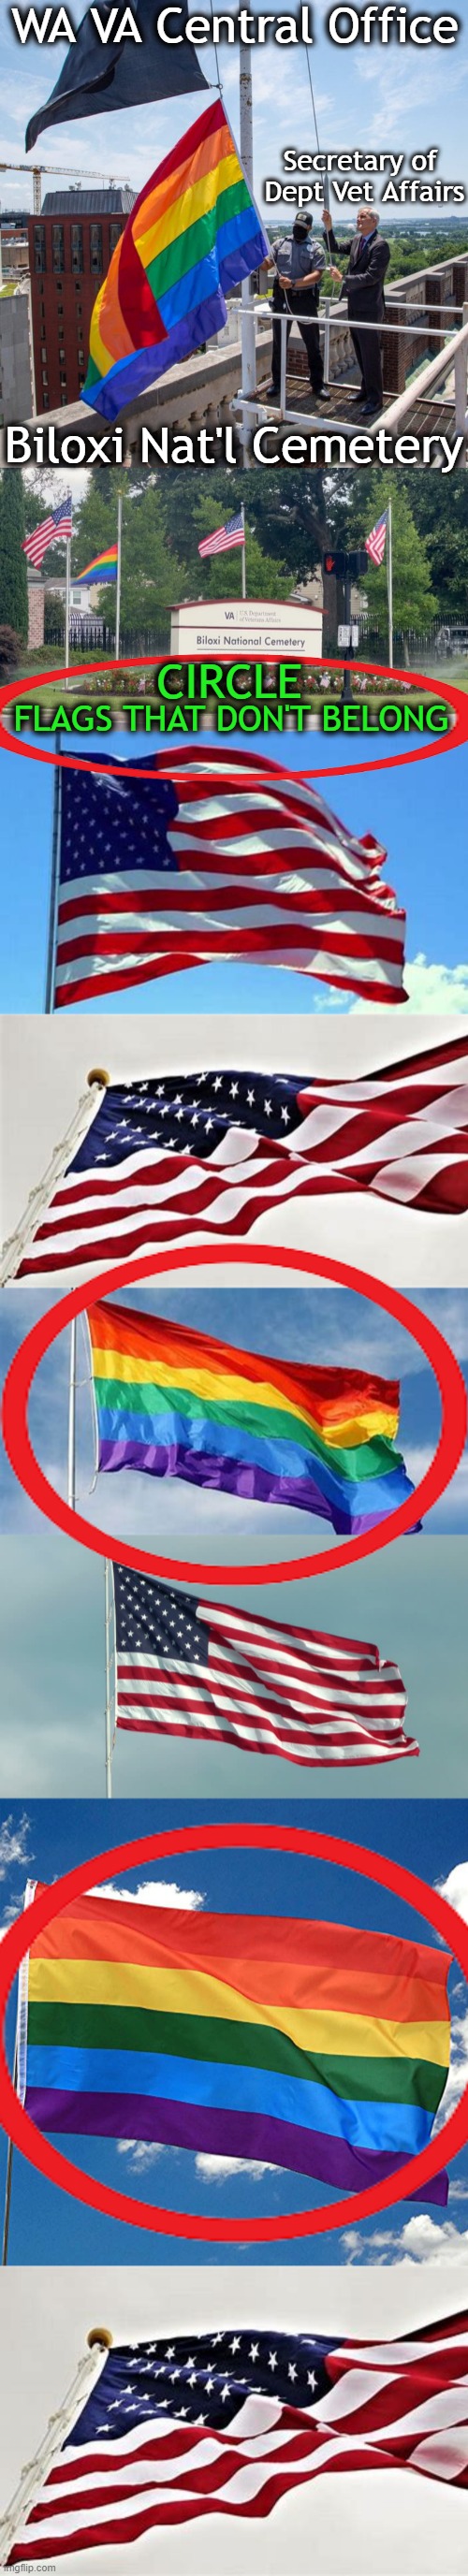 This "IN YOUR FACE" Agenda Has Gone Off The Rails... | WA VA Central Office; Secretary of 
Dept Vet Affairs; CIRCLE; Biloxi Nat'l Cemetery; FLAGS THAT DON'T BELONG | image tagged in politics,liberalism,leftists,american flag,gay pride flag,in your face | made w/ Imgflip meme maker